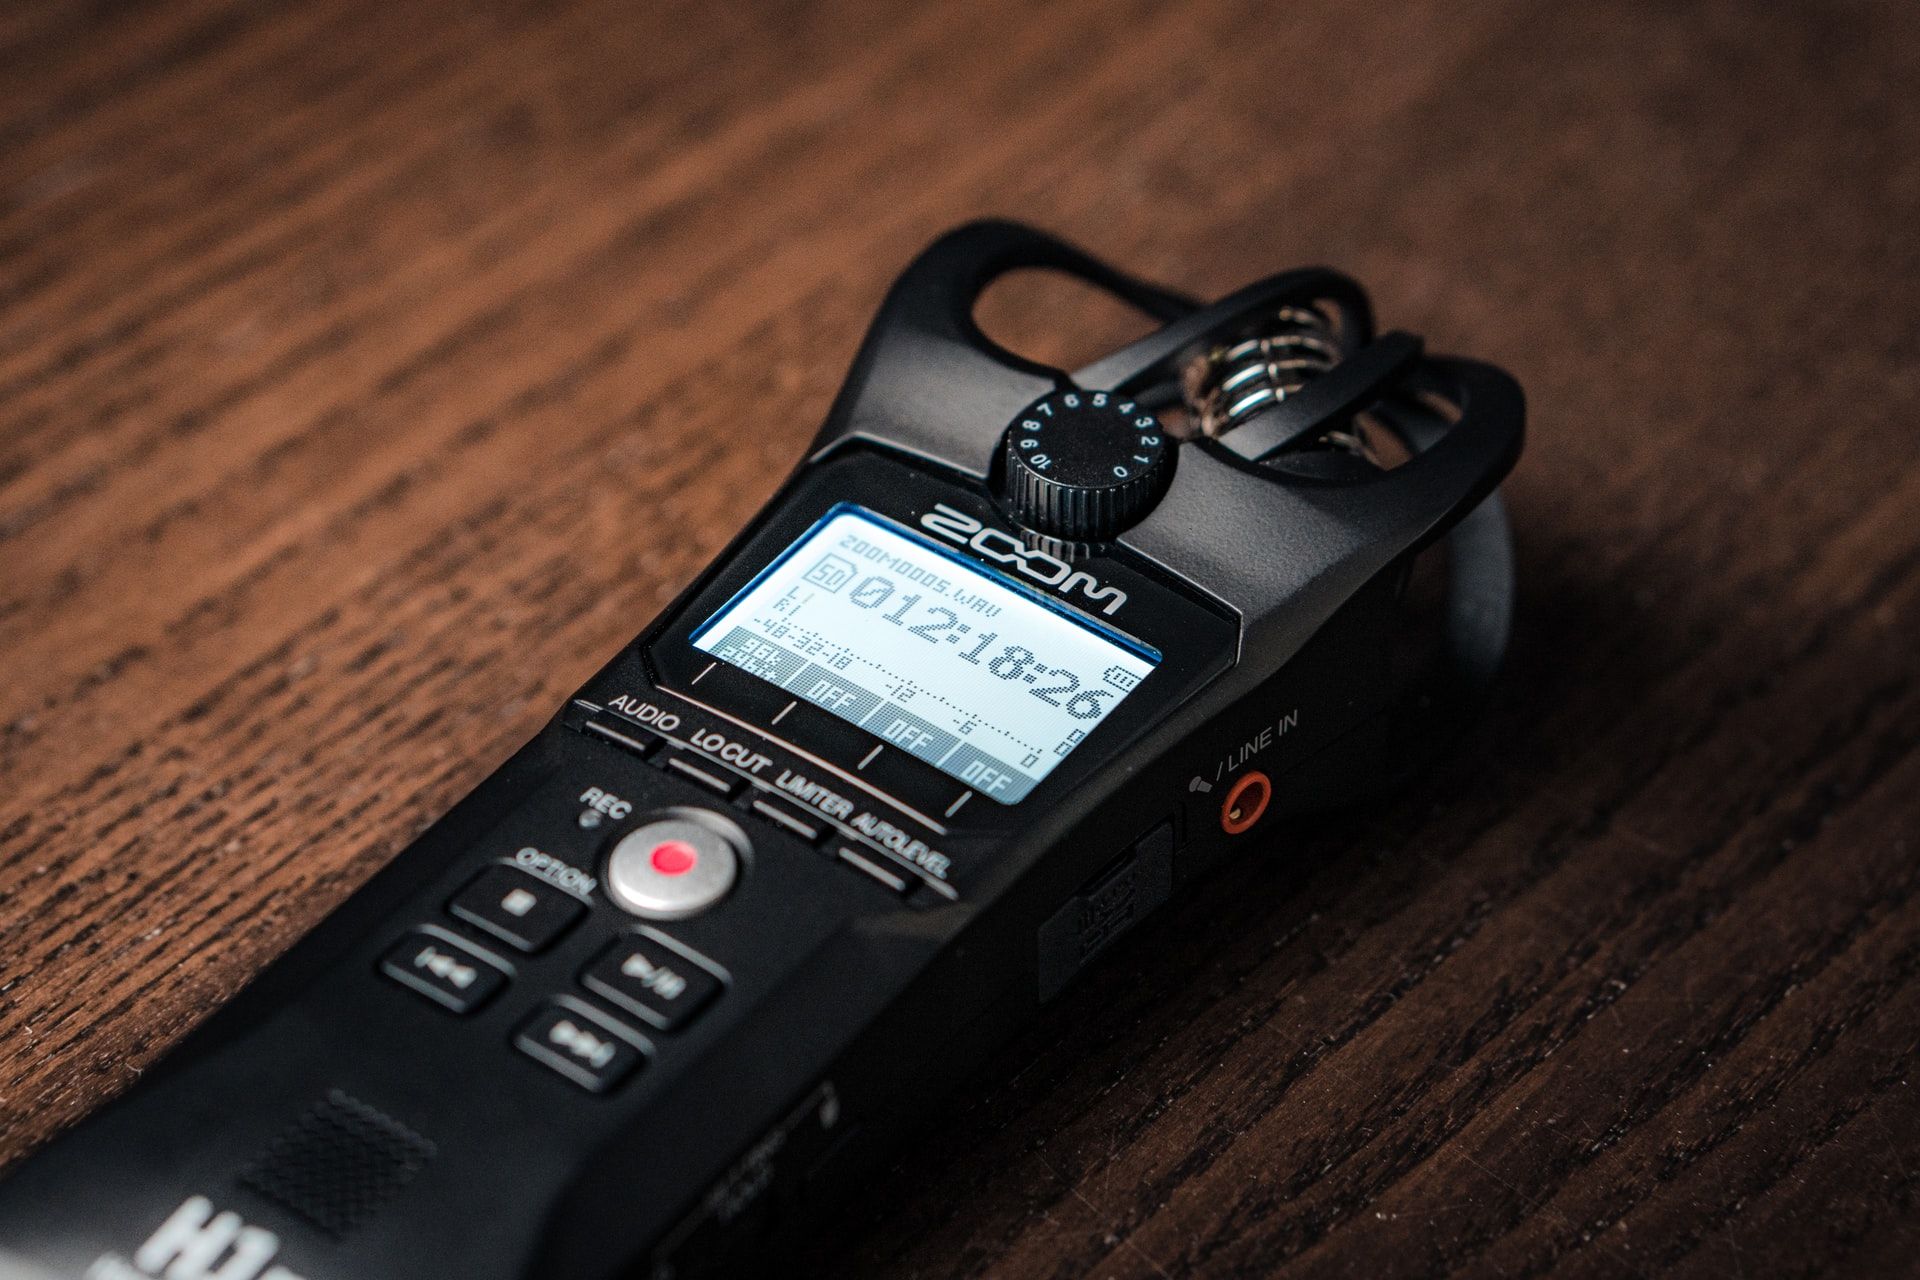 A close up image of a Zoom handheld audio recorder